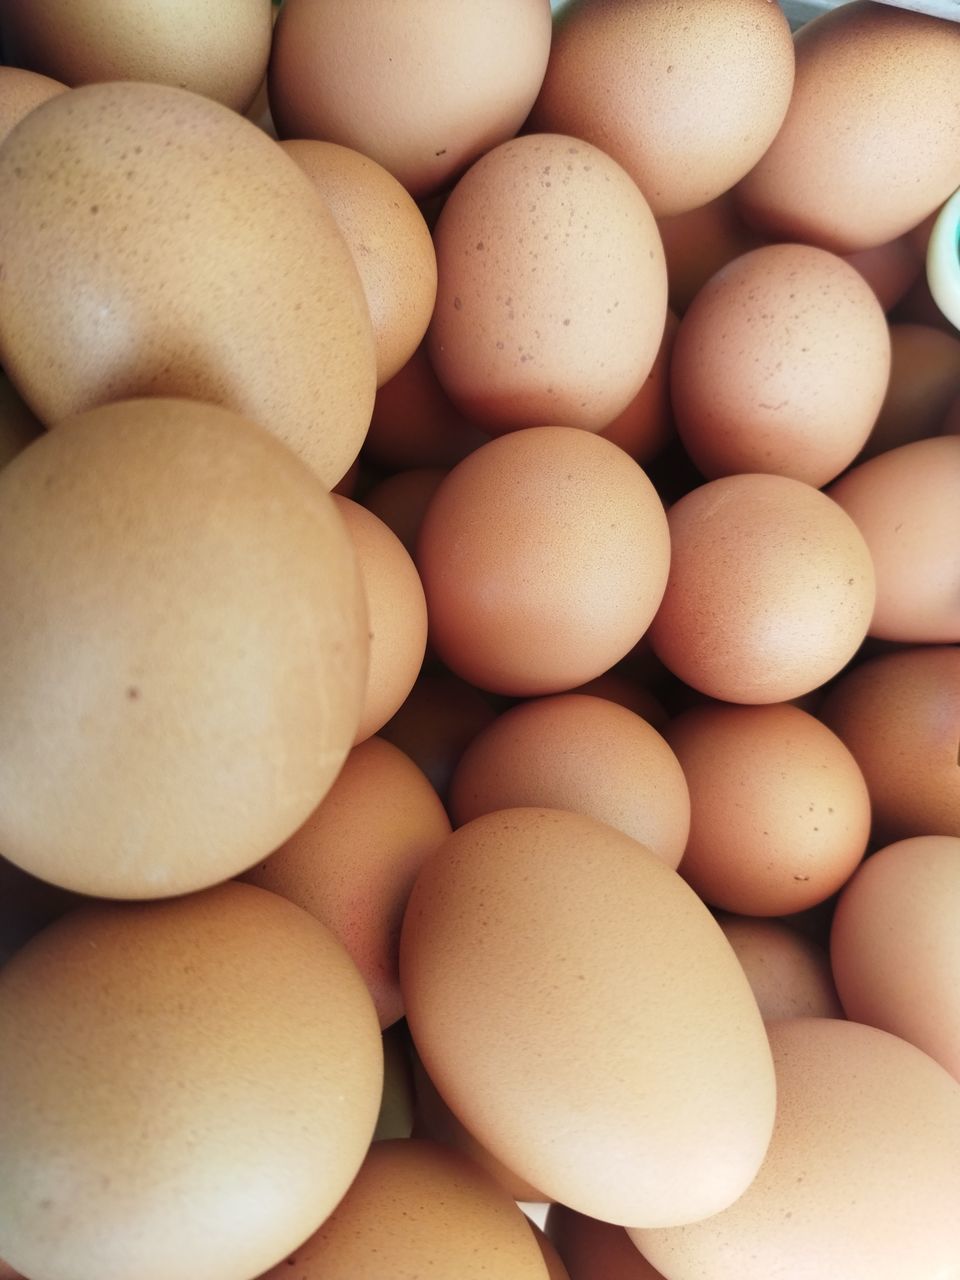 food, food and drink, freshness, egg, wellbeing, healthy eating, large group of objects, raw food, no people, brown, abundance, organic, fragility, indoors, close-up, animal egg, still life, group of objects, high angle view, backgrounds, arrangement, full frame, repetition, order, in a row, directly above